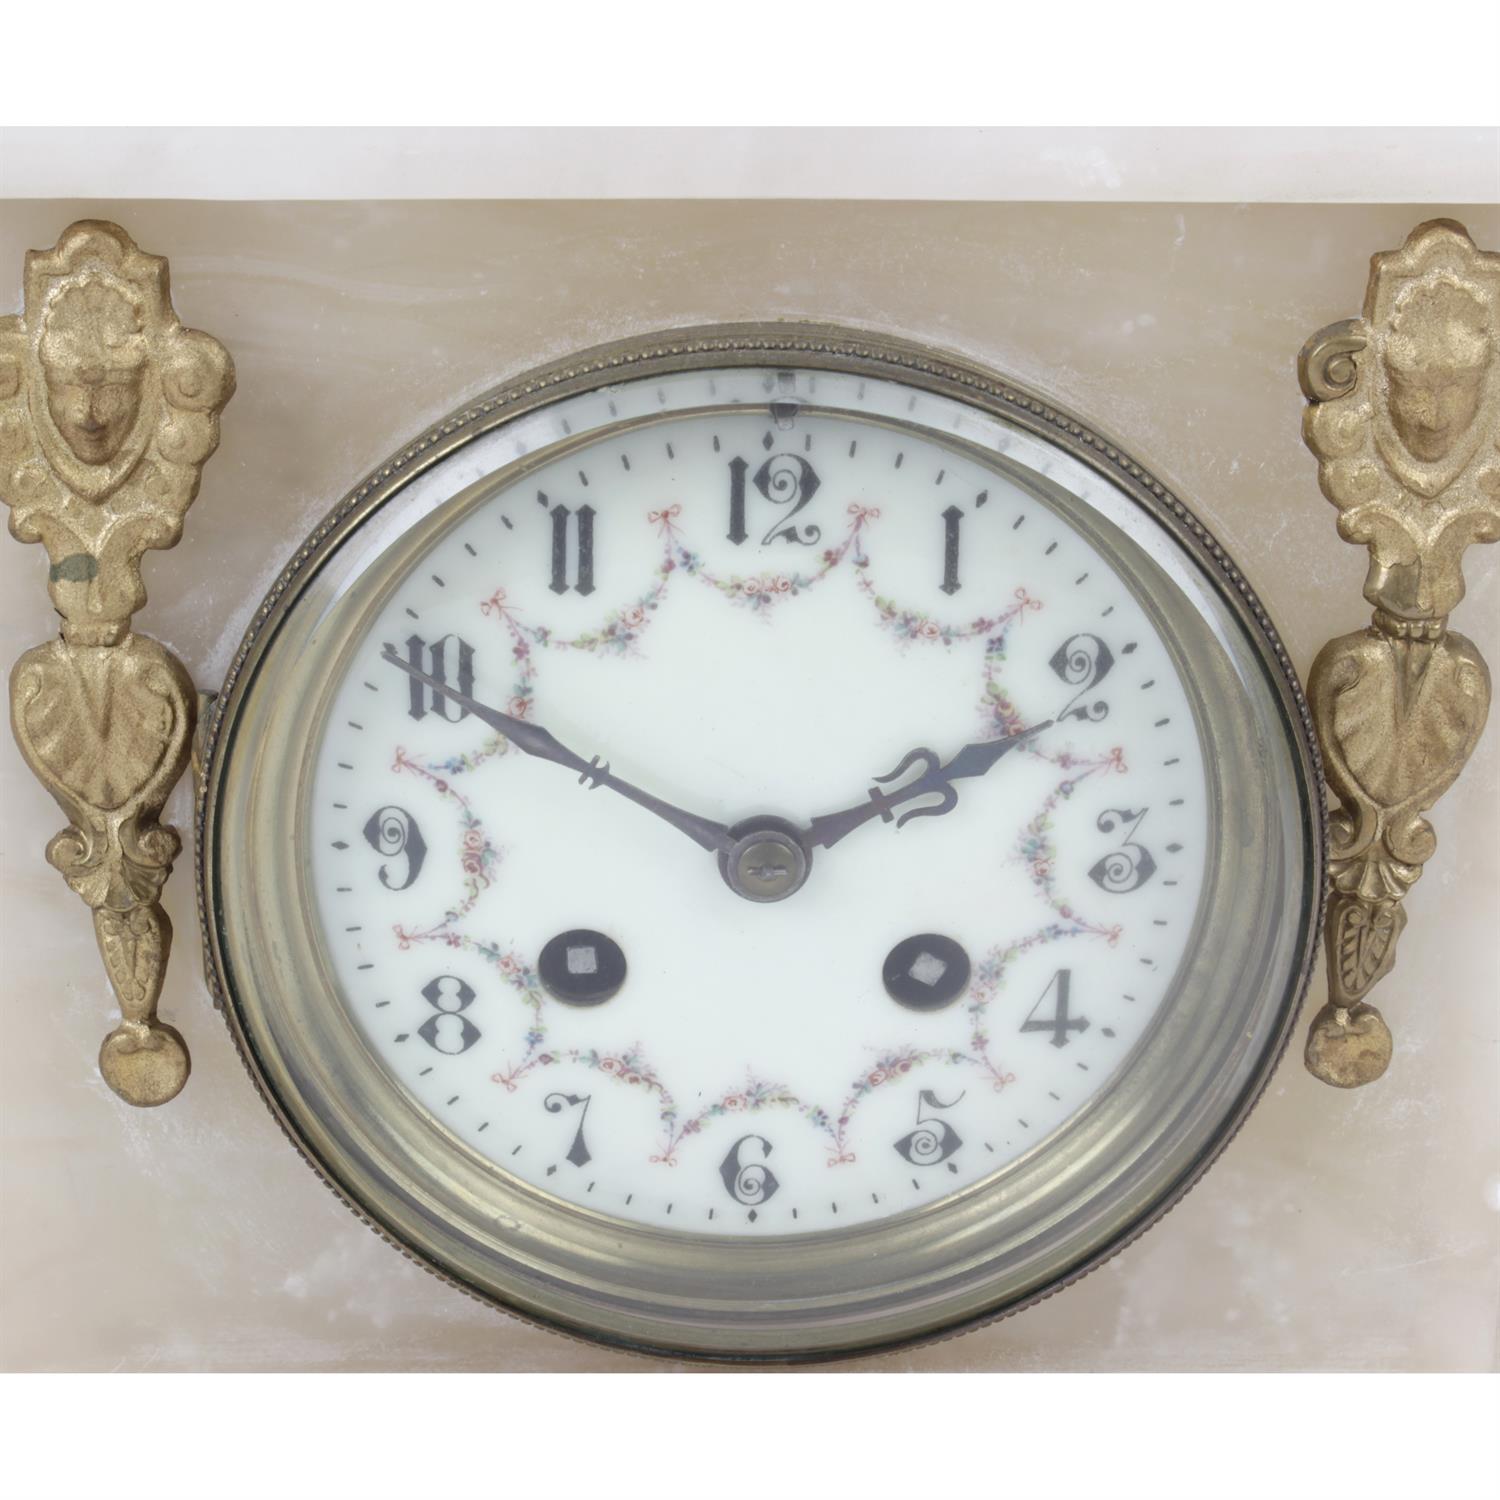 Two 20th century mantel clocks with gilt lion finials - Image 3 of 4